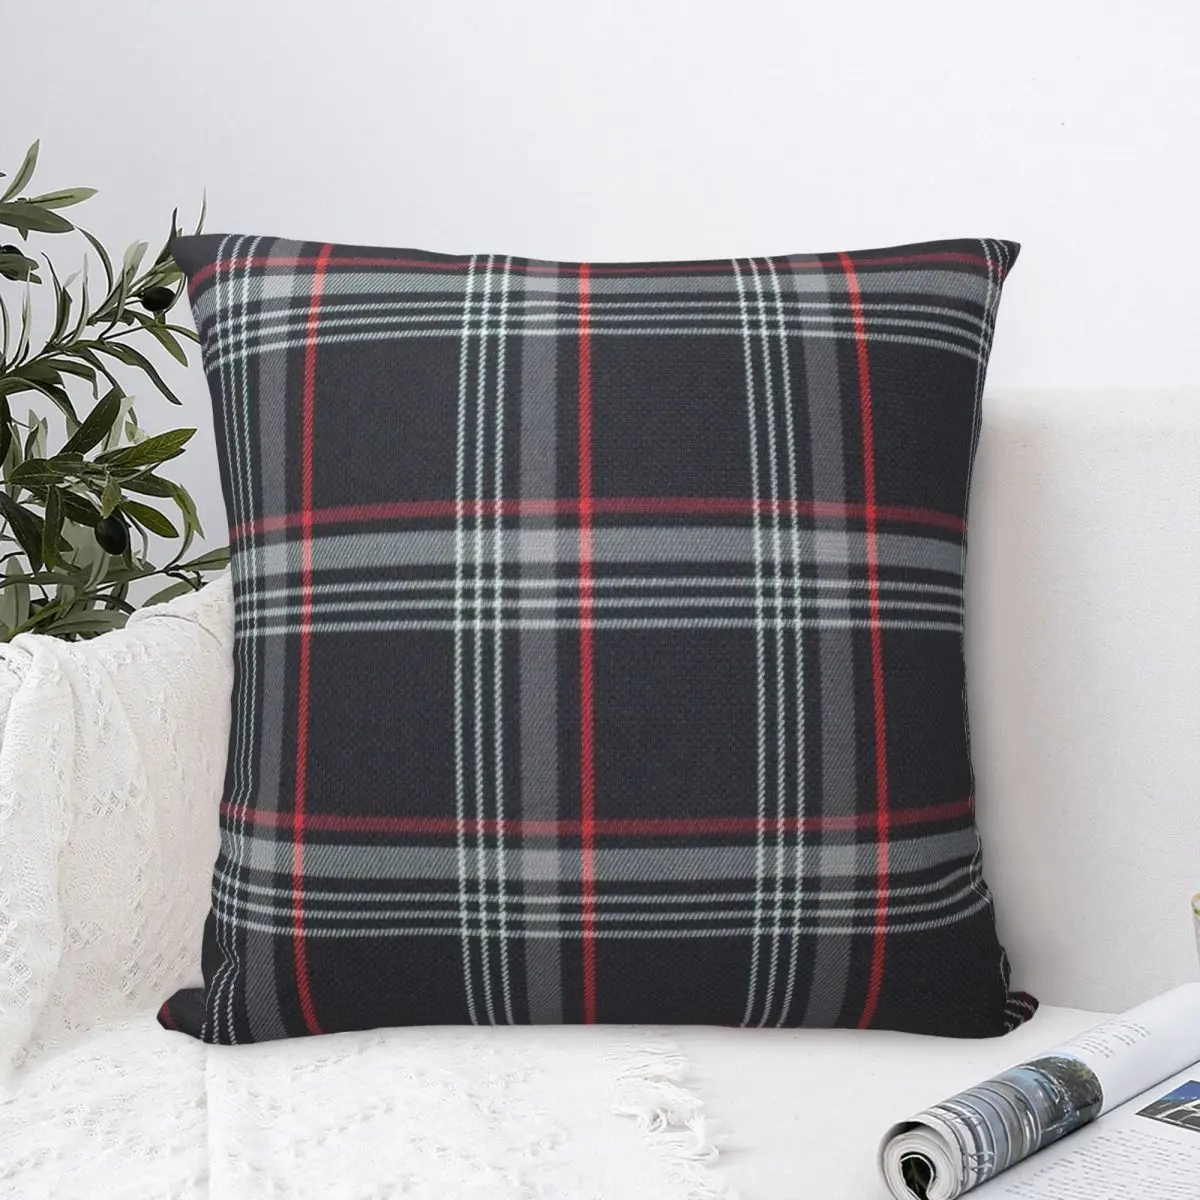 

GTi Tartan (5) Square Pillowcase Cushion Cover Decorative Pillow Case Polyester Throw Pillow cover For Home Sofa Living Room